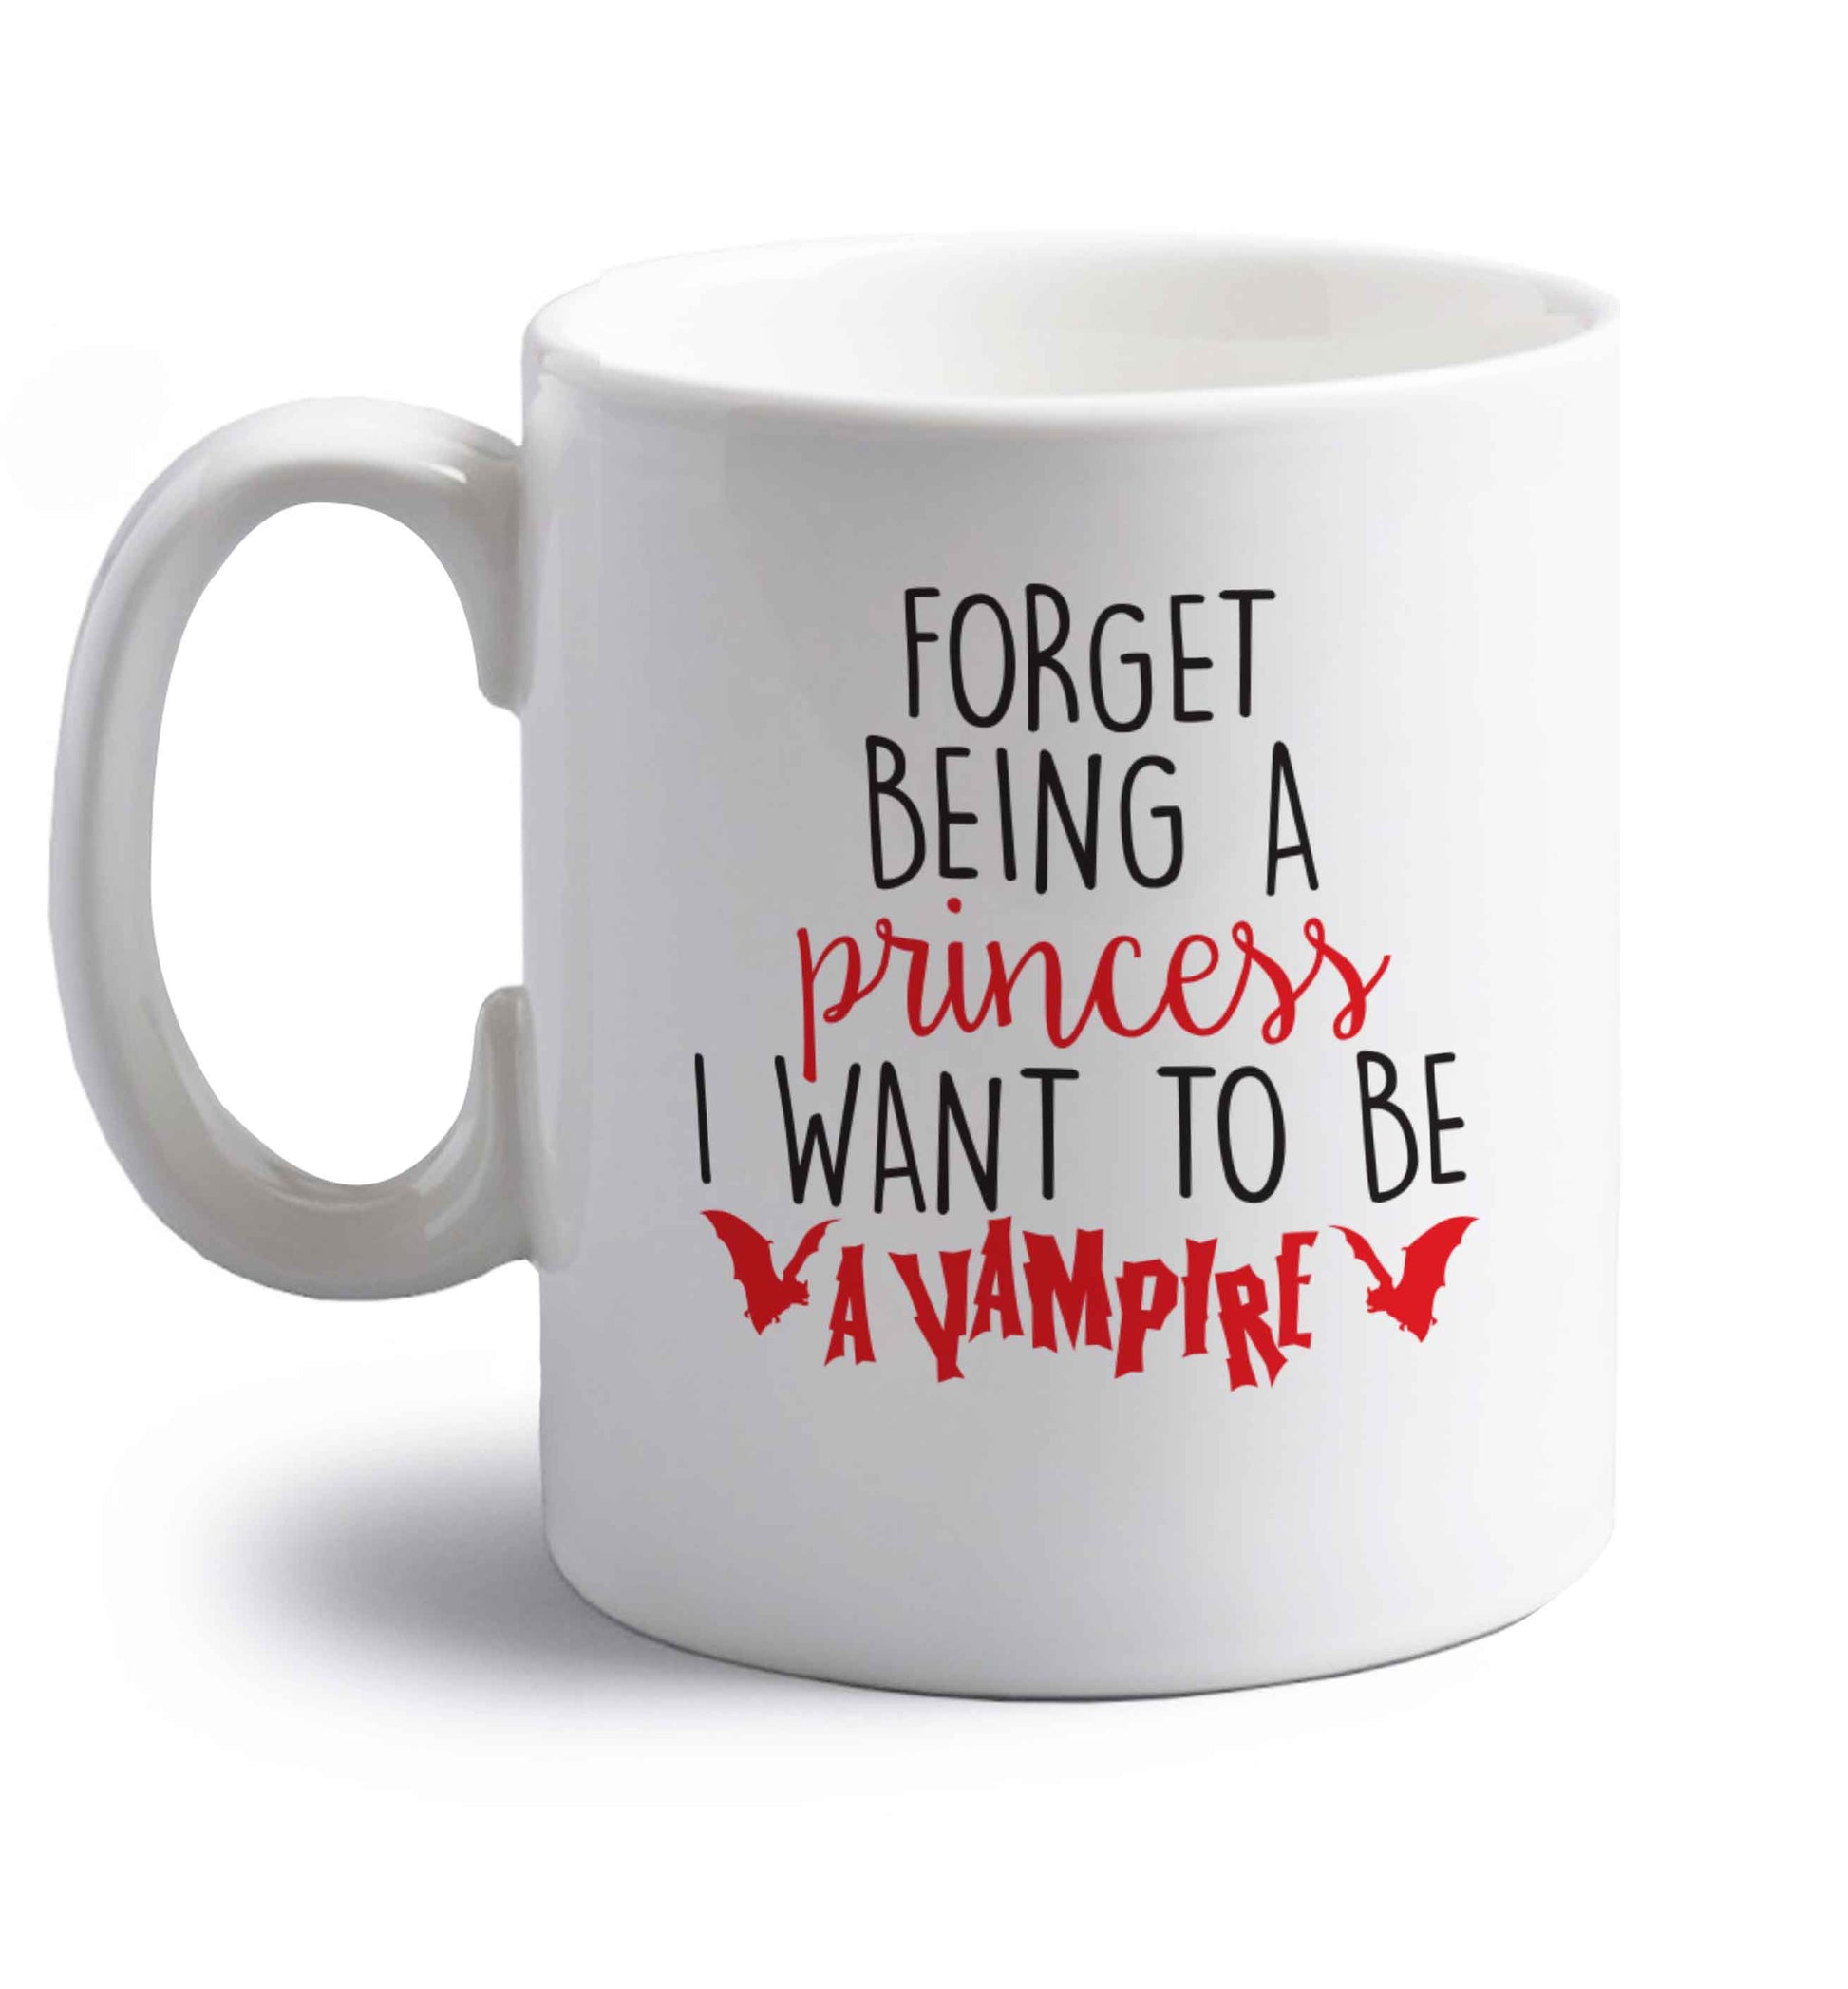 Forget being a princess I want to be a vampire right handed white ceramic mug 